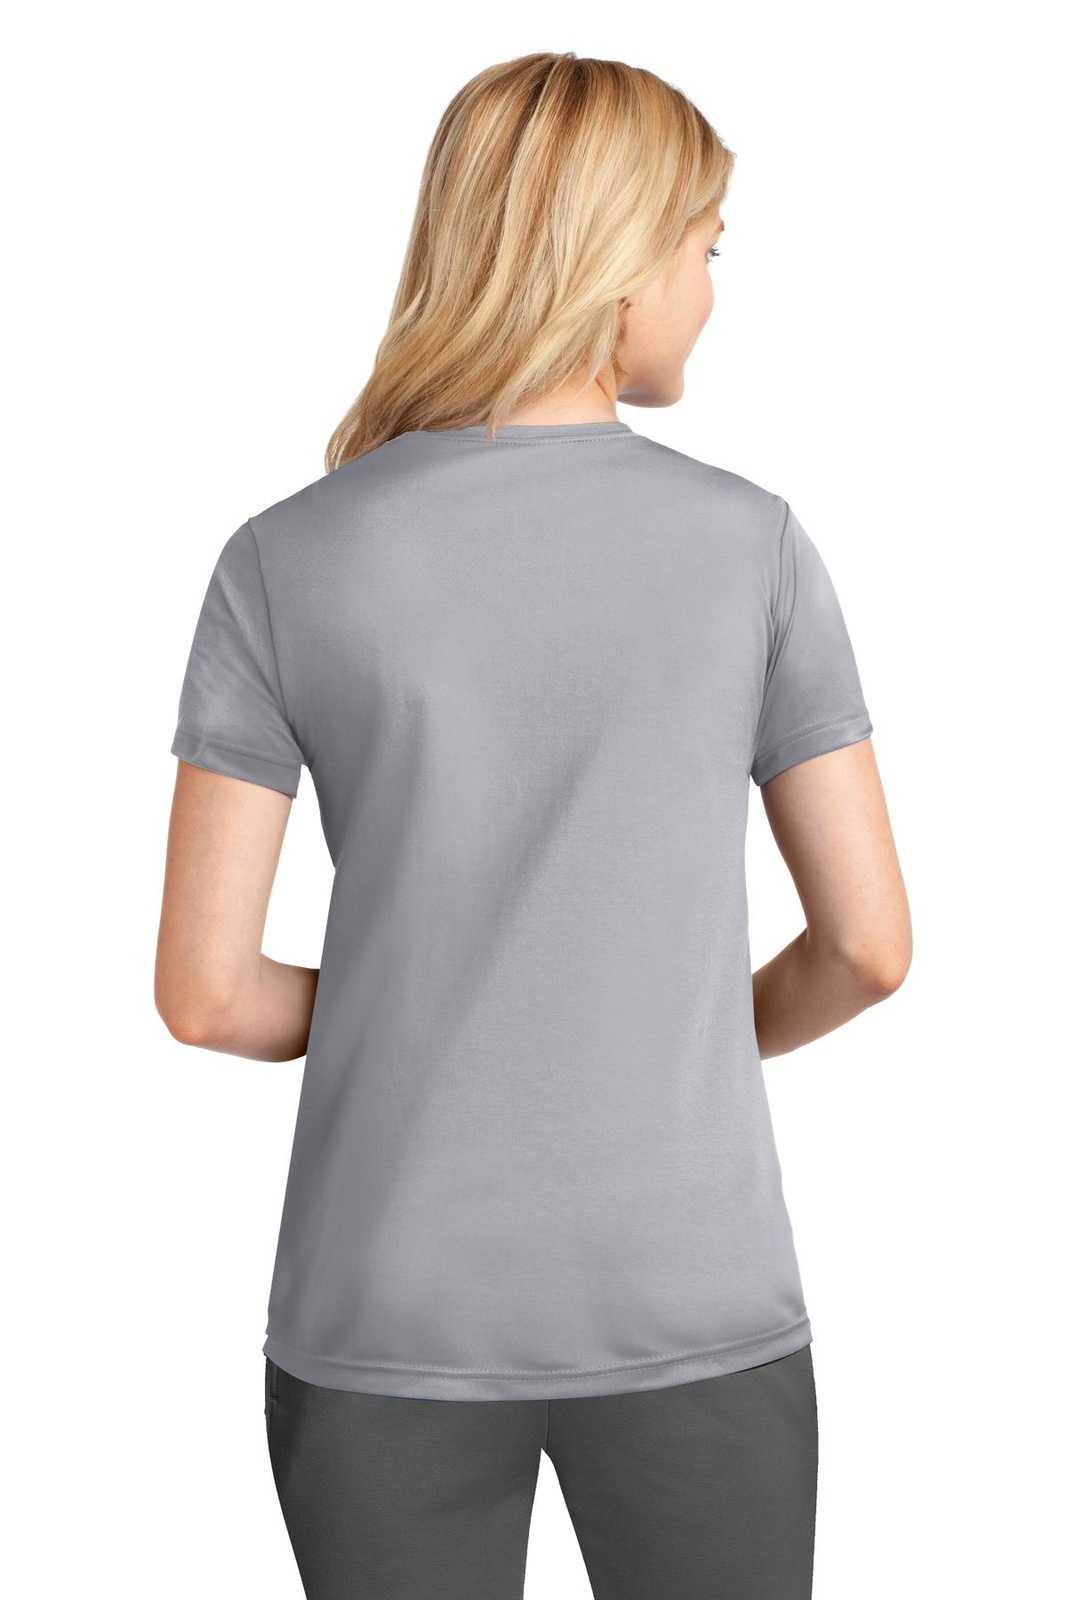 Port & Company LPC380 Ladies Performance Tee - Silver - HIT a Double - 1